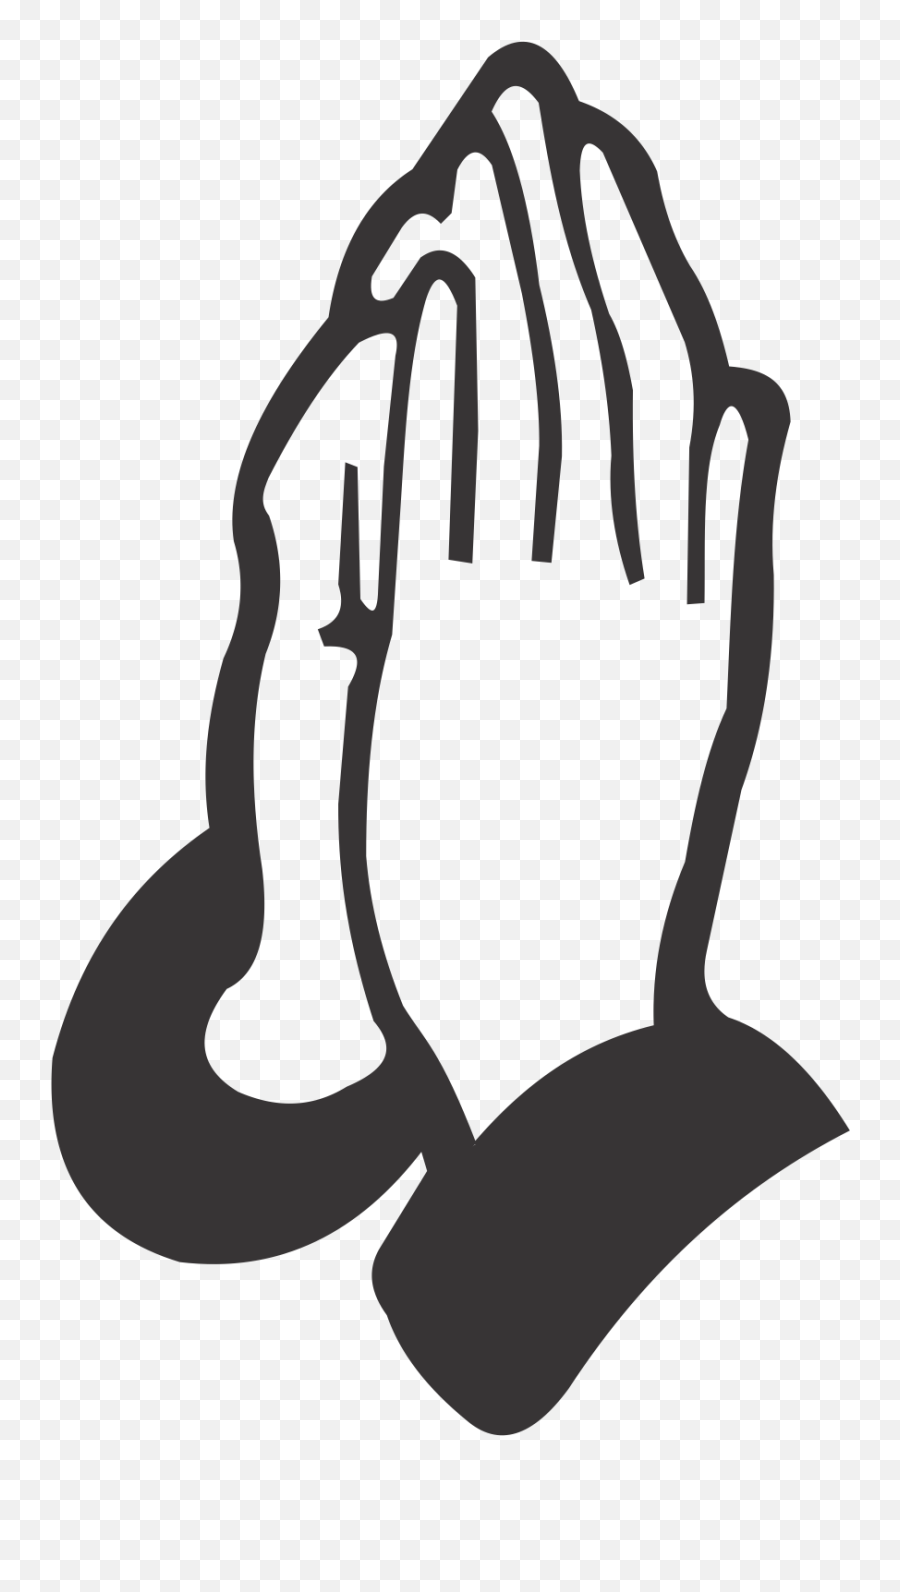 Prayer Hands Png Images - 6000 Vectors Stock Photos U0026 Psd Png Praying Hands Clipart Black And White Emoji,Prayer Hands Emoticon Windows